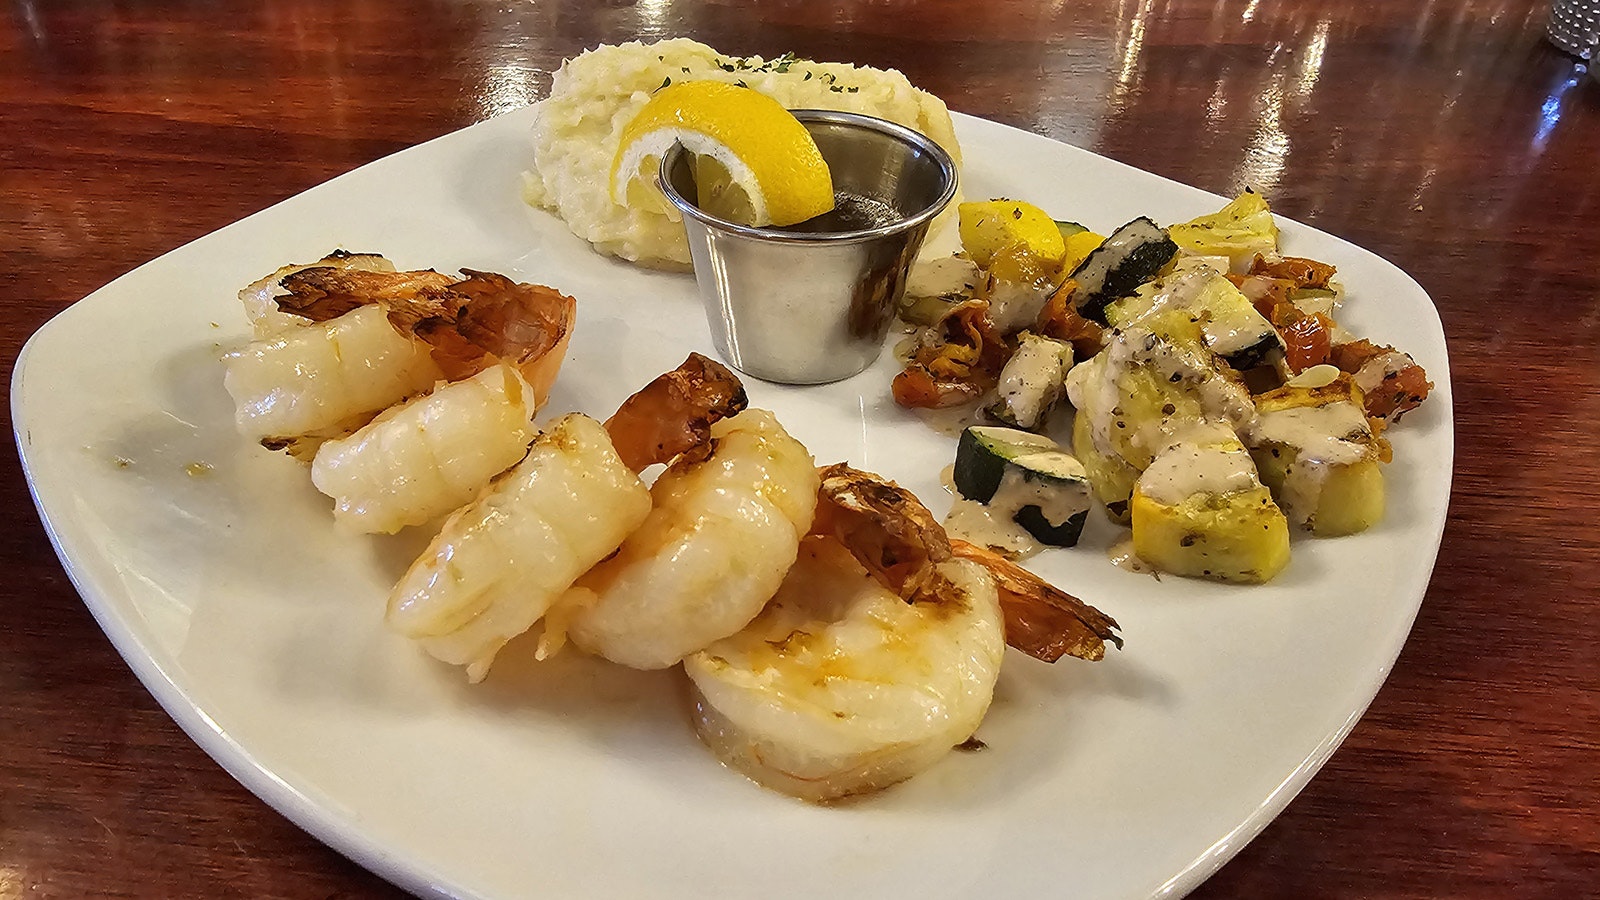 Steaks aren't the only thing available at Miners and Stockmen's Steakhouse in Hartville. Shrimp are also available, along clarified butter and seasonal vegetables in a cream sauce.